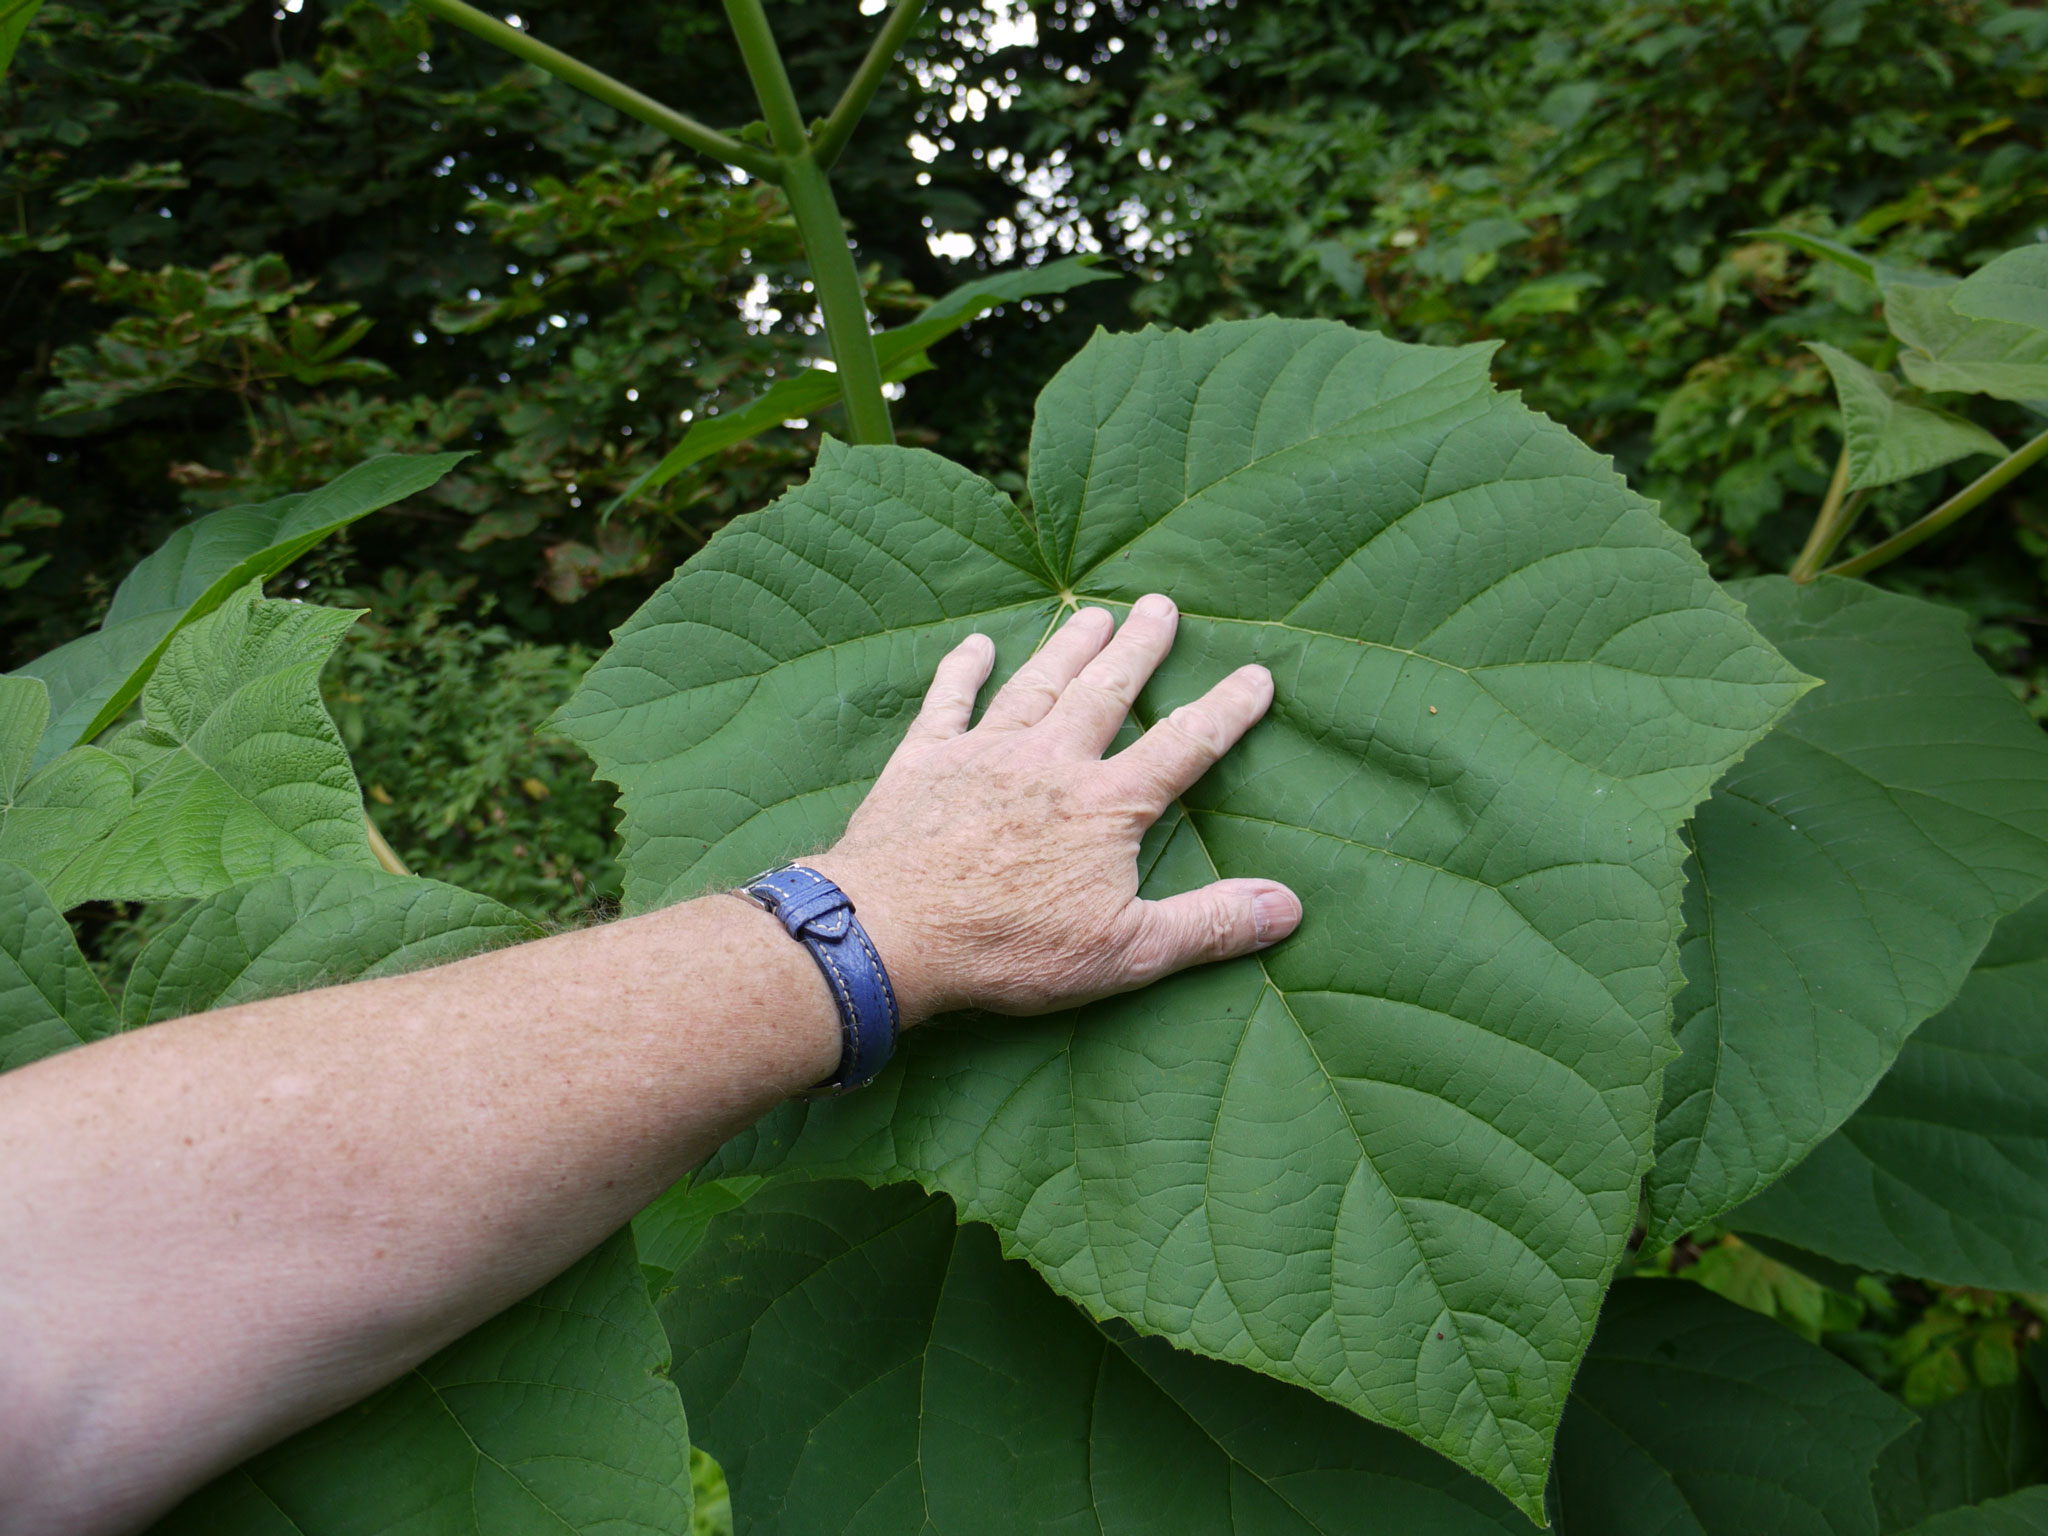 Typical Paulownia (Catalpifolia) leaf with hand for scale